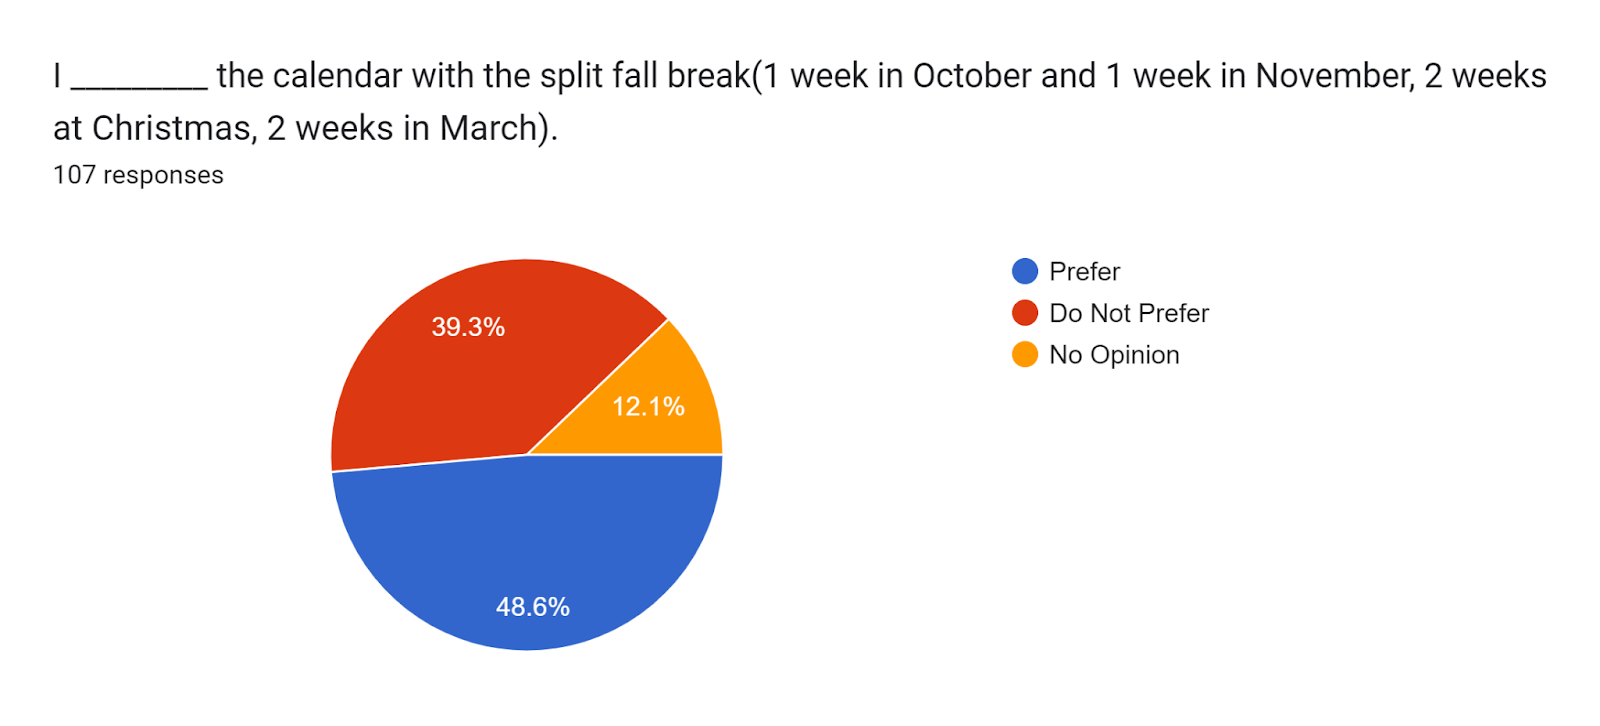 Forms response chart. Question title: I _________ the calendar with the split fall break(1 week in October and 1 week in November, 2 weeks at Christmas, 2 weeks in March). . Number of responses: 107 responses.